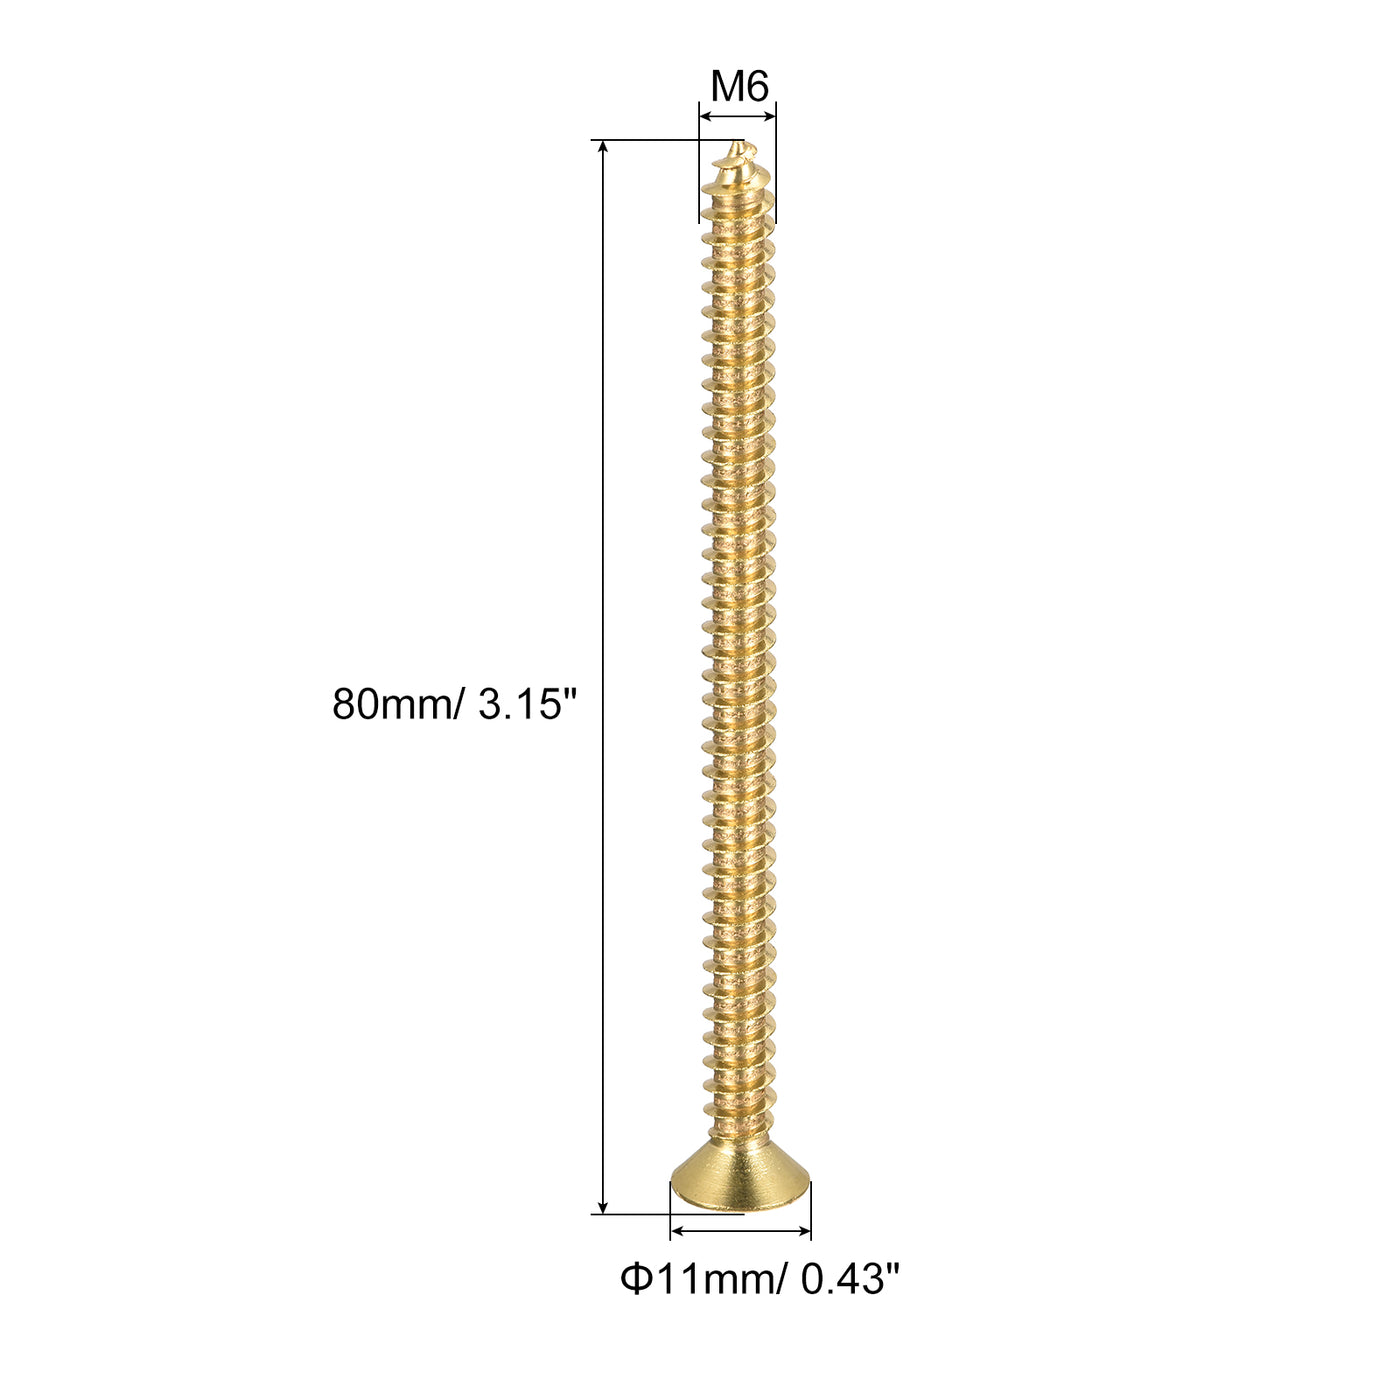 uxcell Uxcell Brass Wood Screws, M6x80mm Phillips Flat Head Self Tapping Connector for Door Hinges, Wooden Furniture, Home Appliances 4Pcs